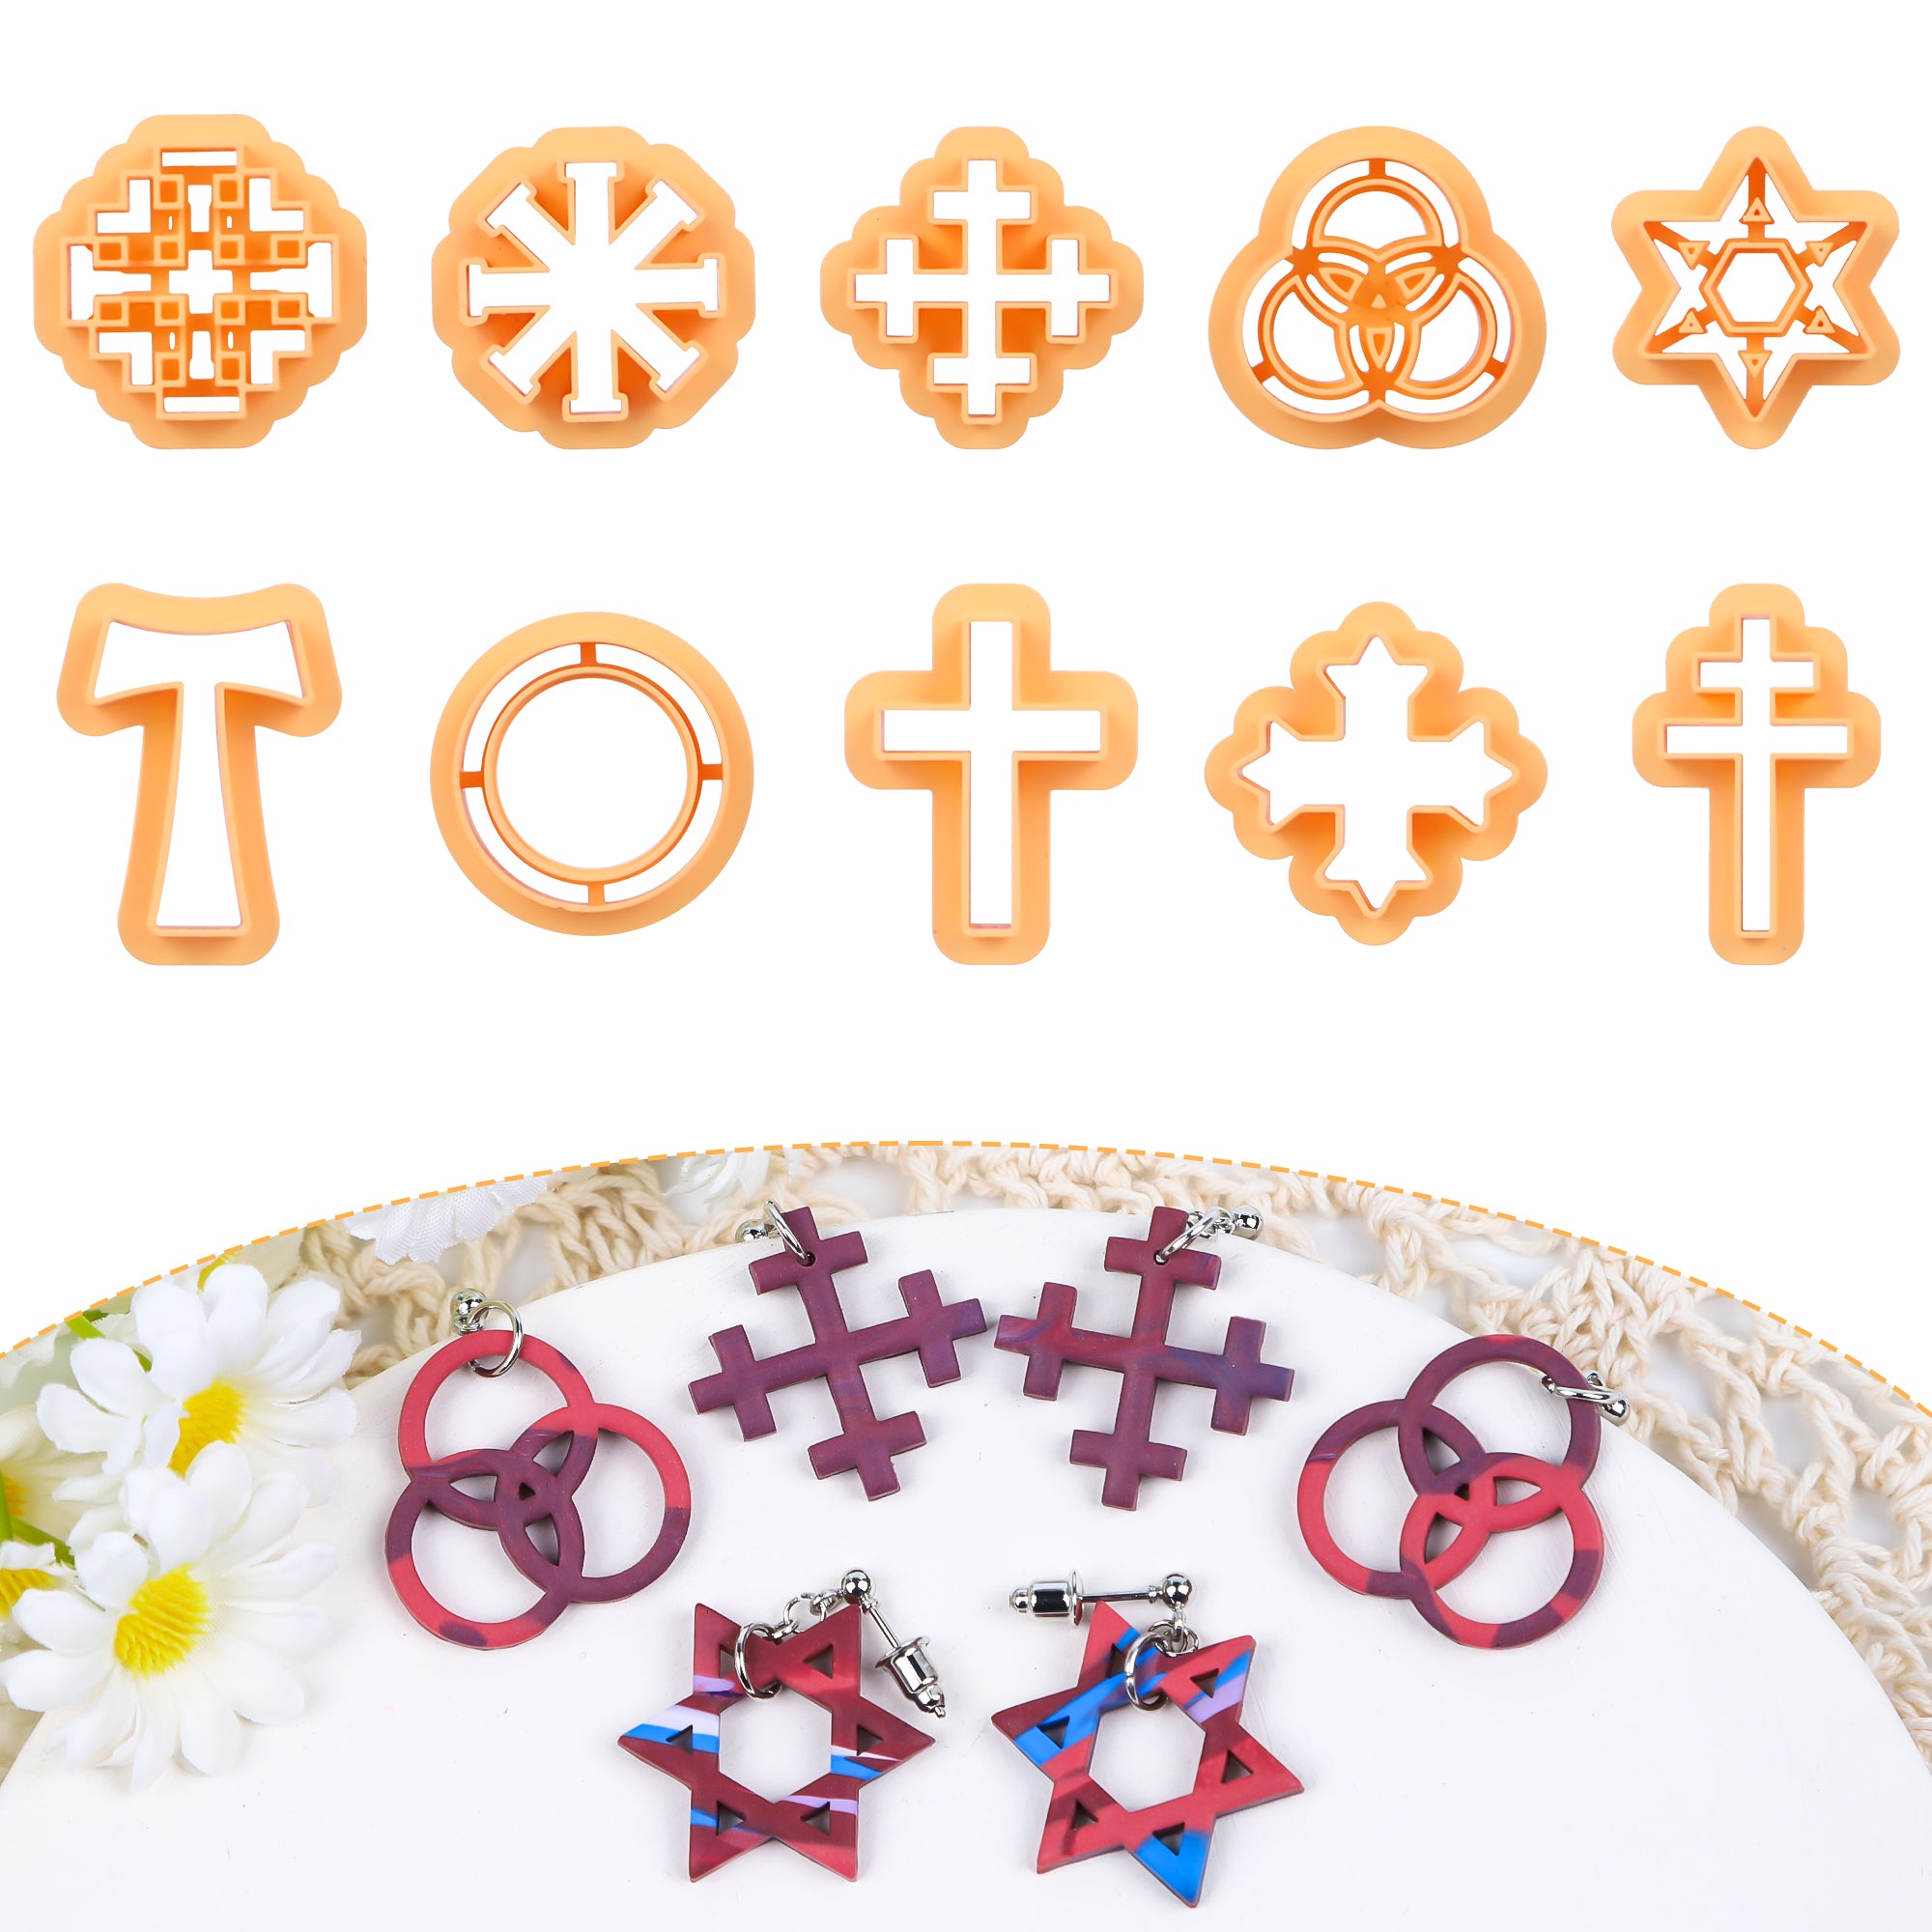 Puocaon Christian Polymer Clay Cutters 10 Pcs